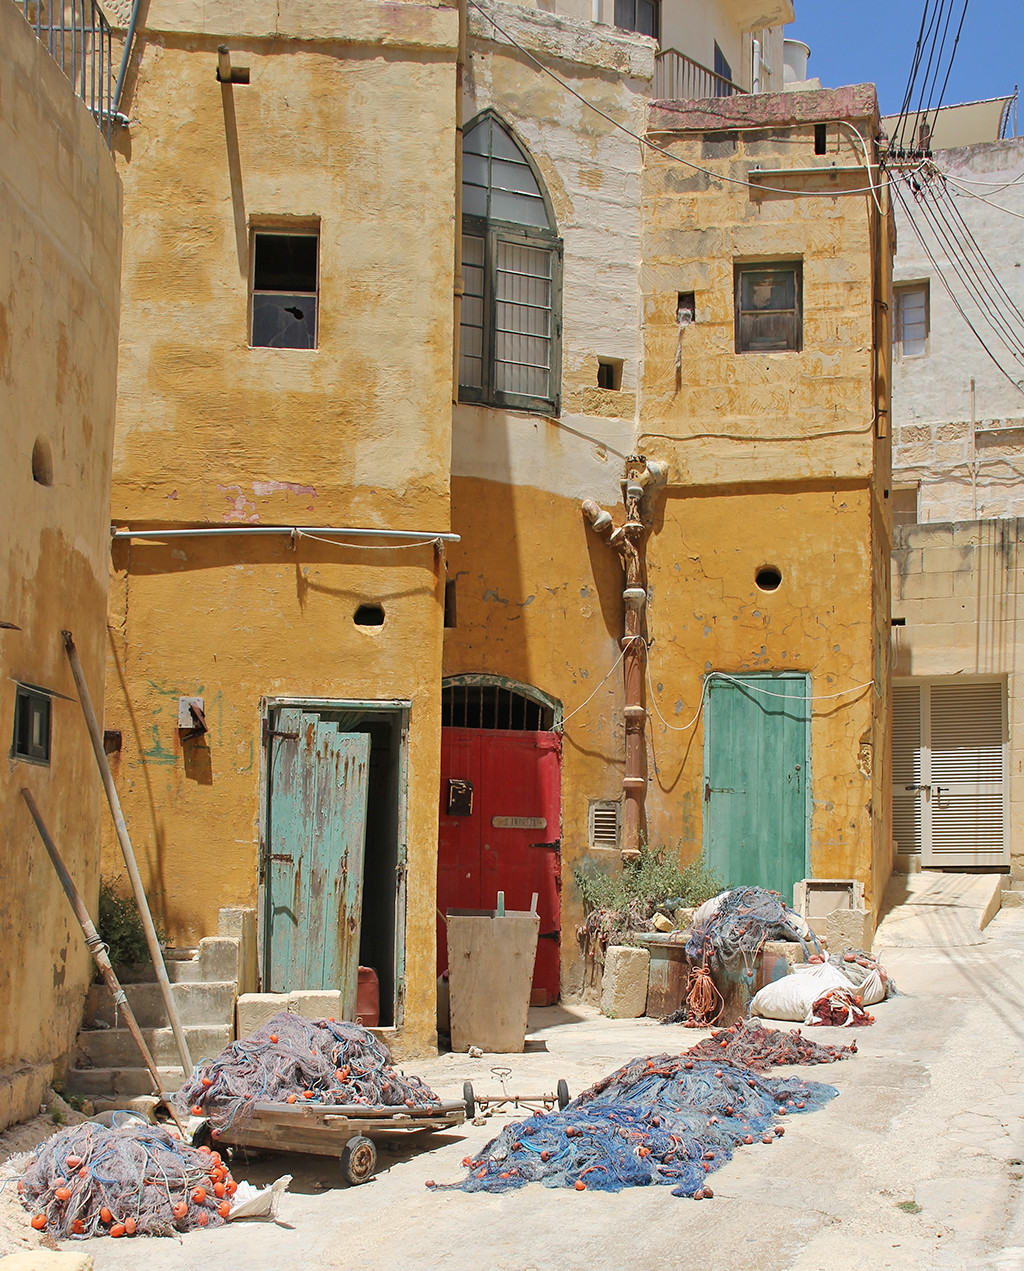 one week in gozo - postcards from malta - streets of gozo